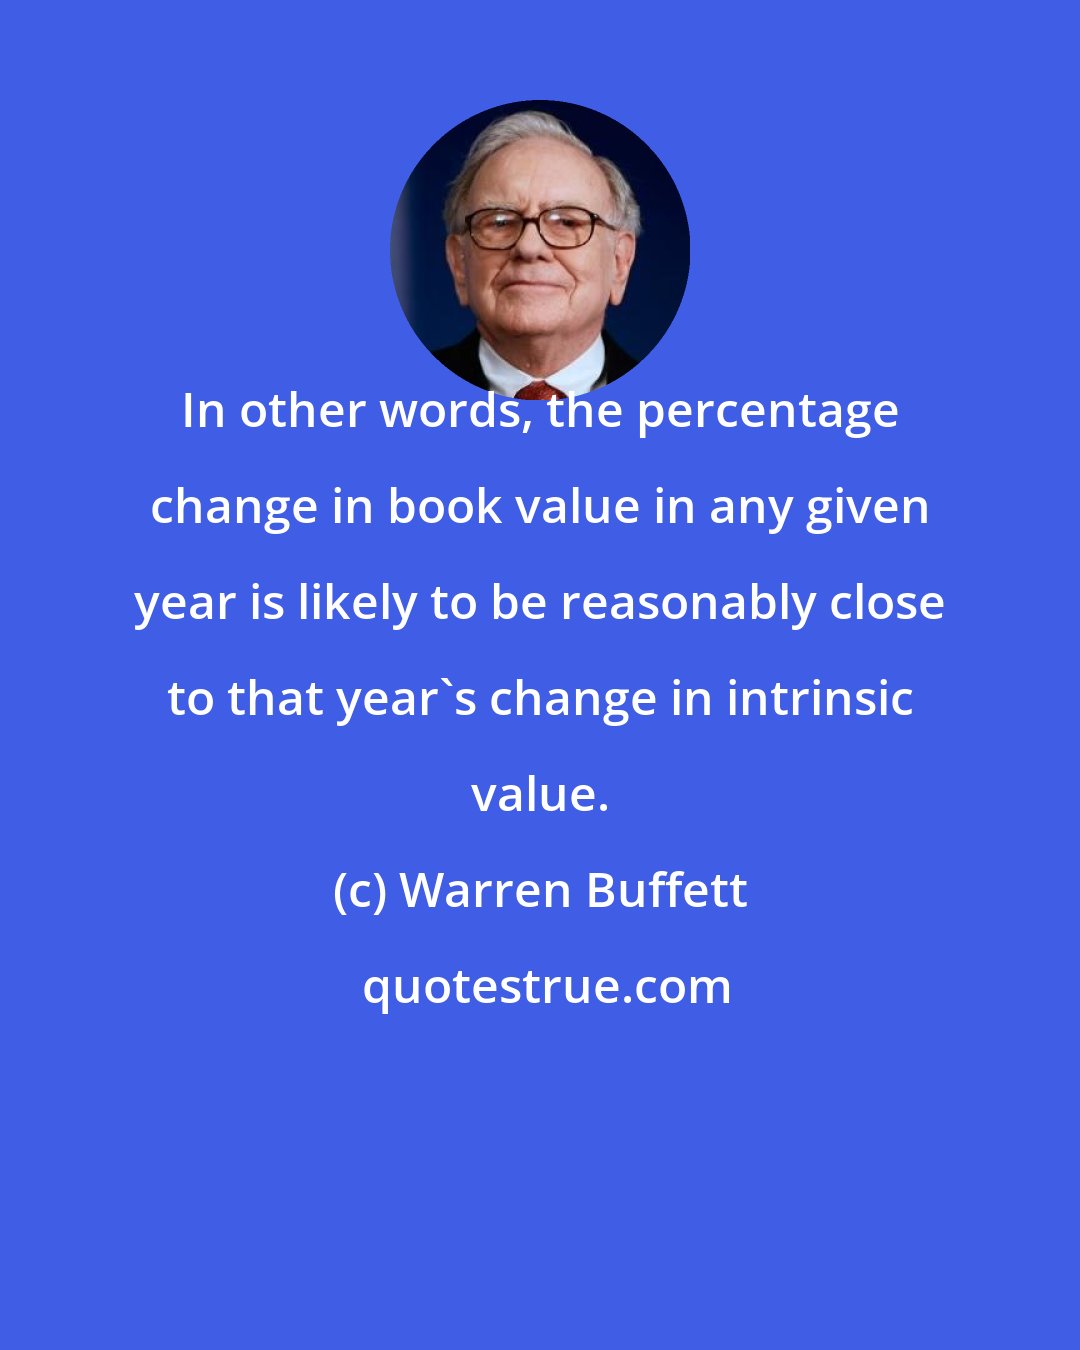 Warren Buffett: In other words, the percentage change in book value in any given year is likely to be reasonably close to that year's change in intrinsic value.